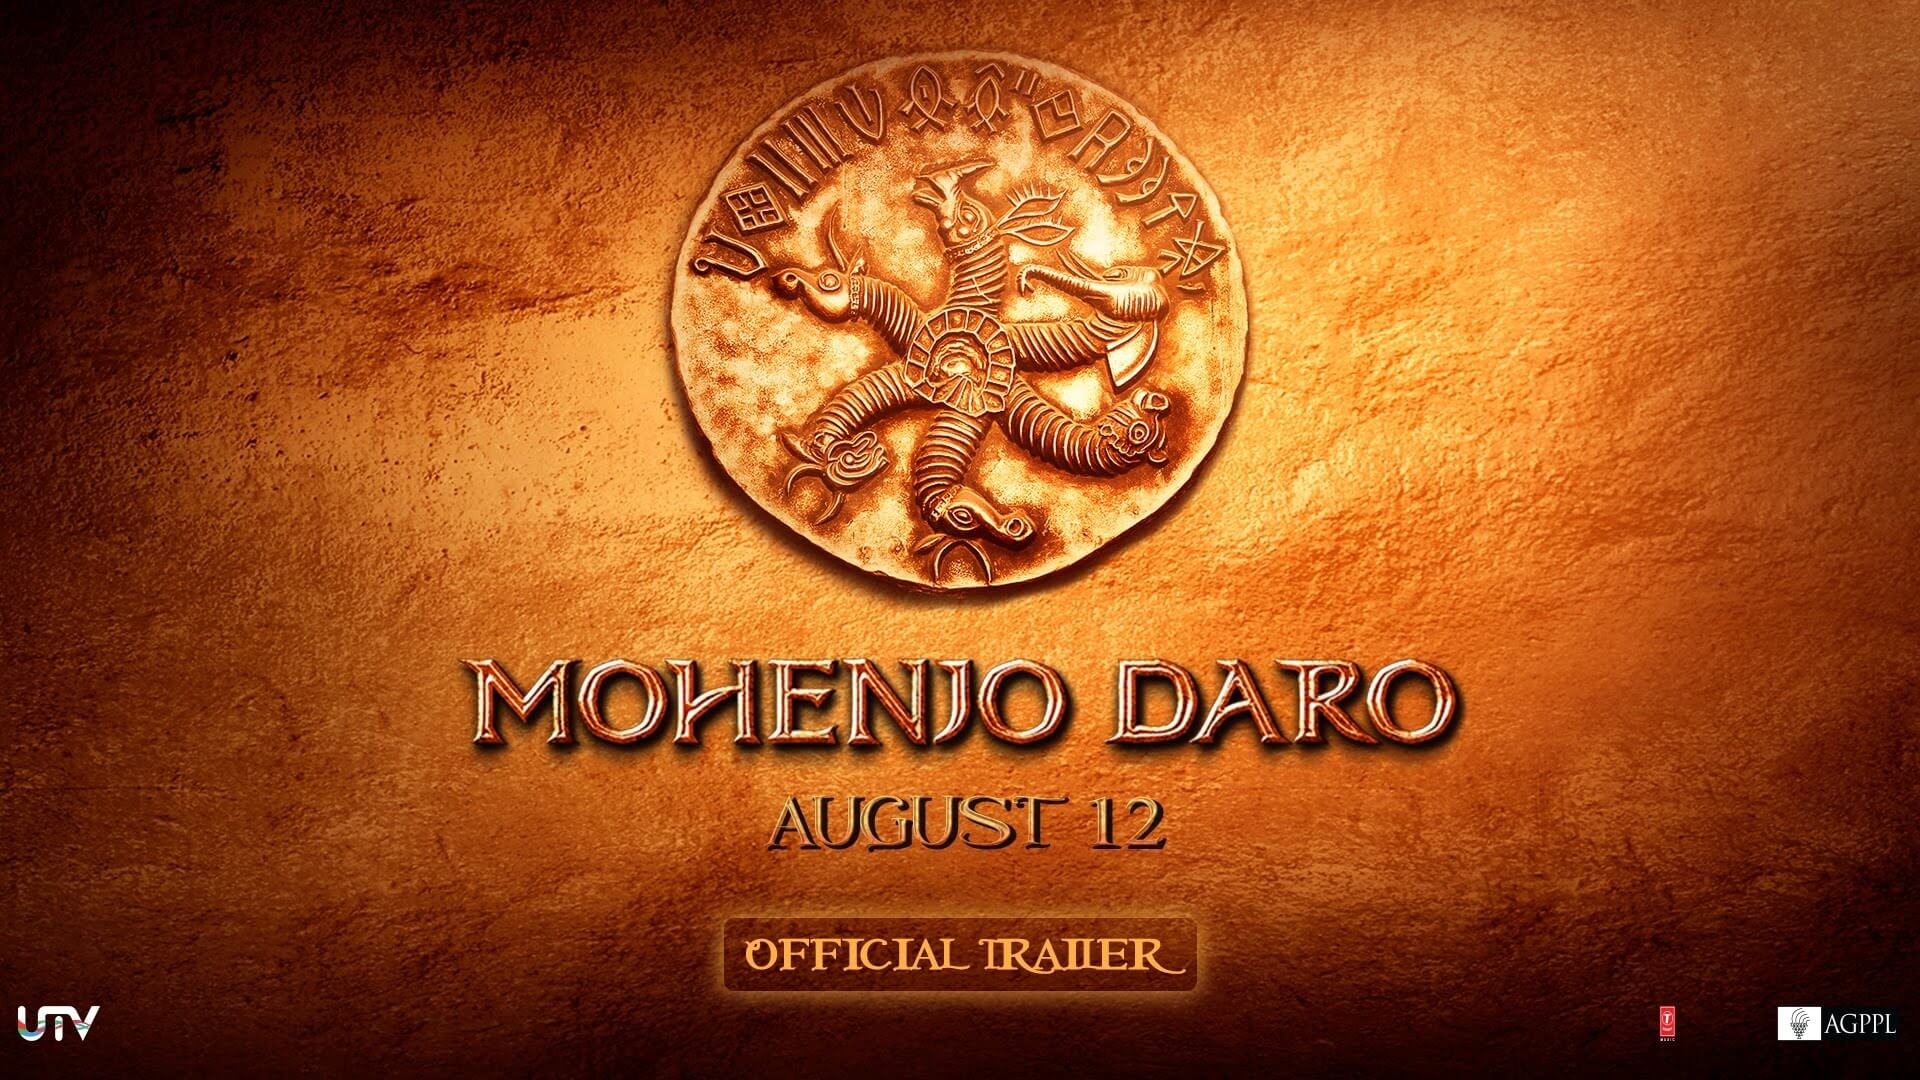 Only a Visionary Could Create Mohenjo Daro and Gowariker Does Just That